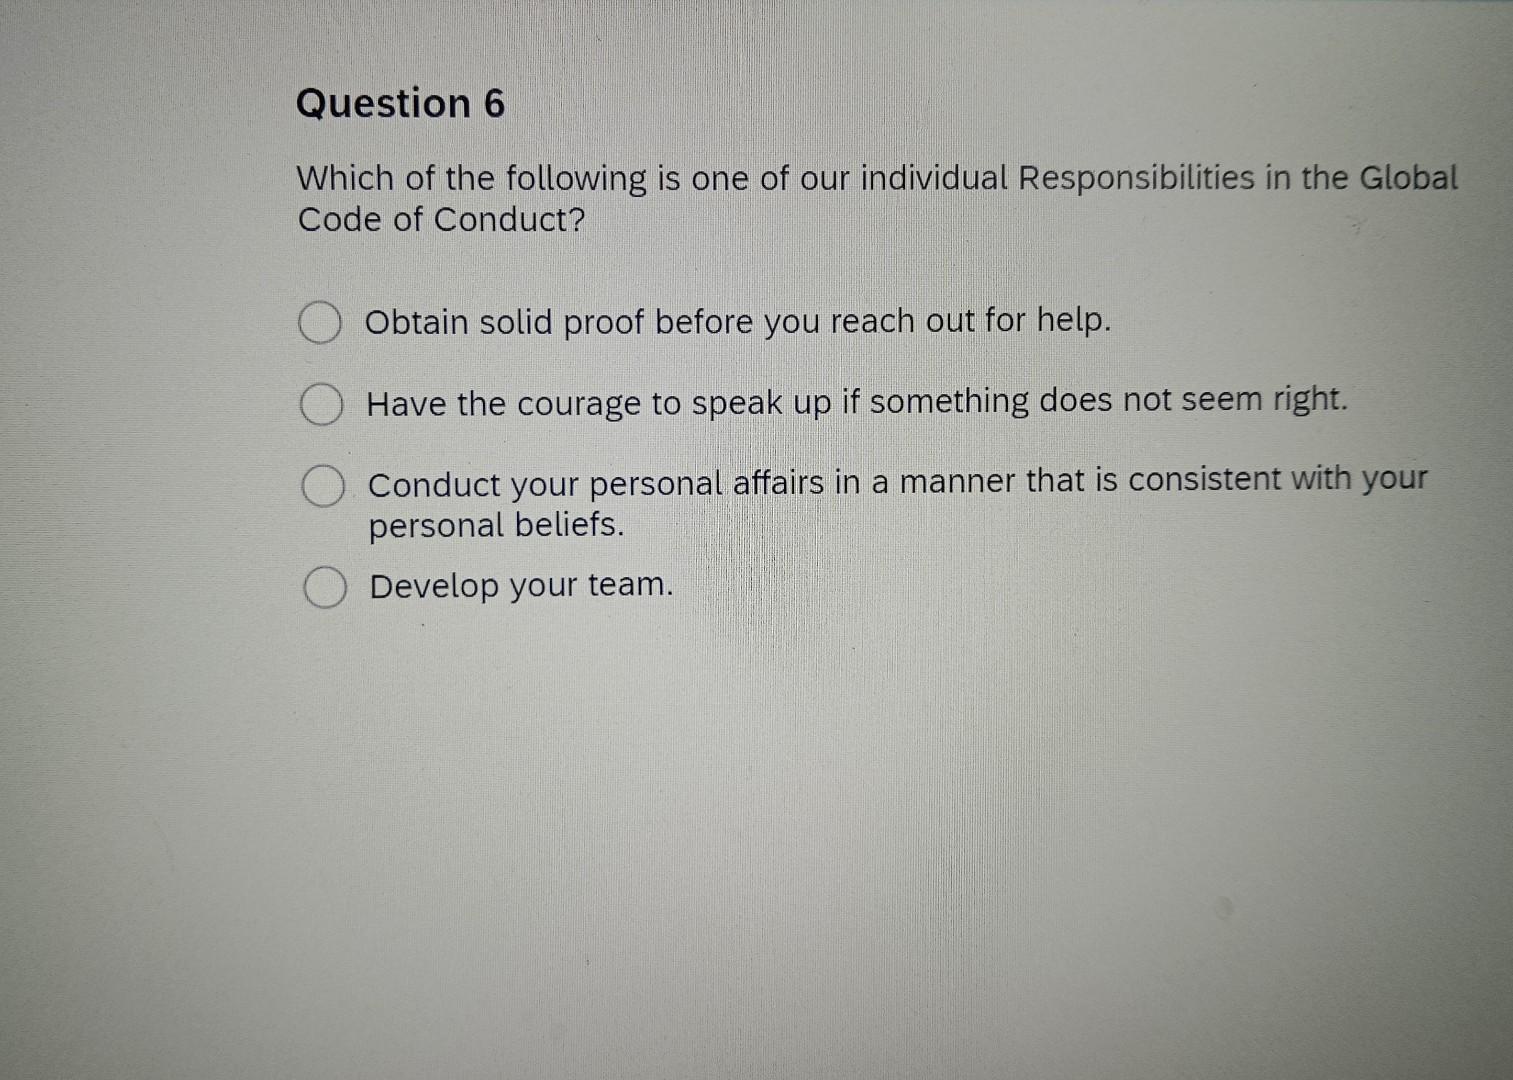 Which of the following is one of our individual Responsibilities in the Global Code of Conduct? Obtain solid proof before you